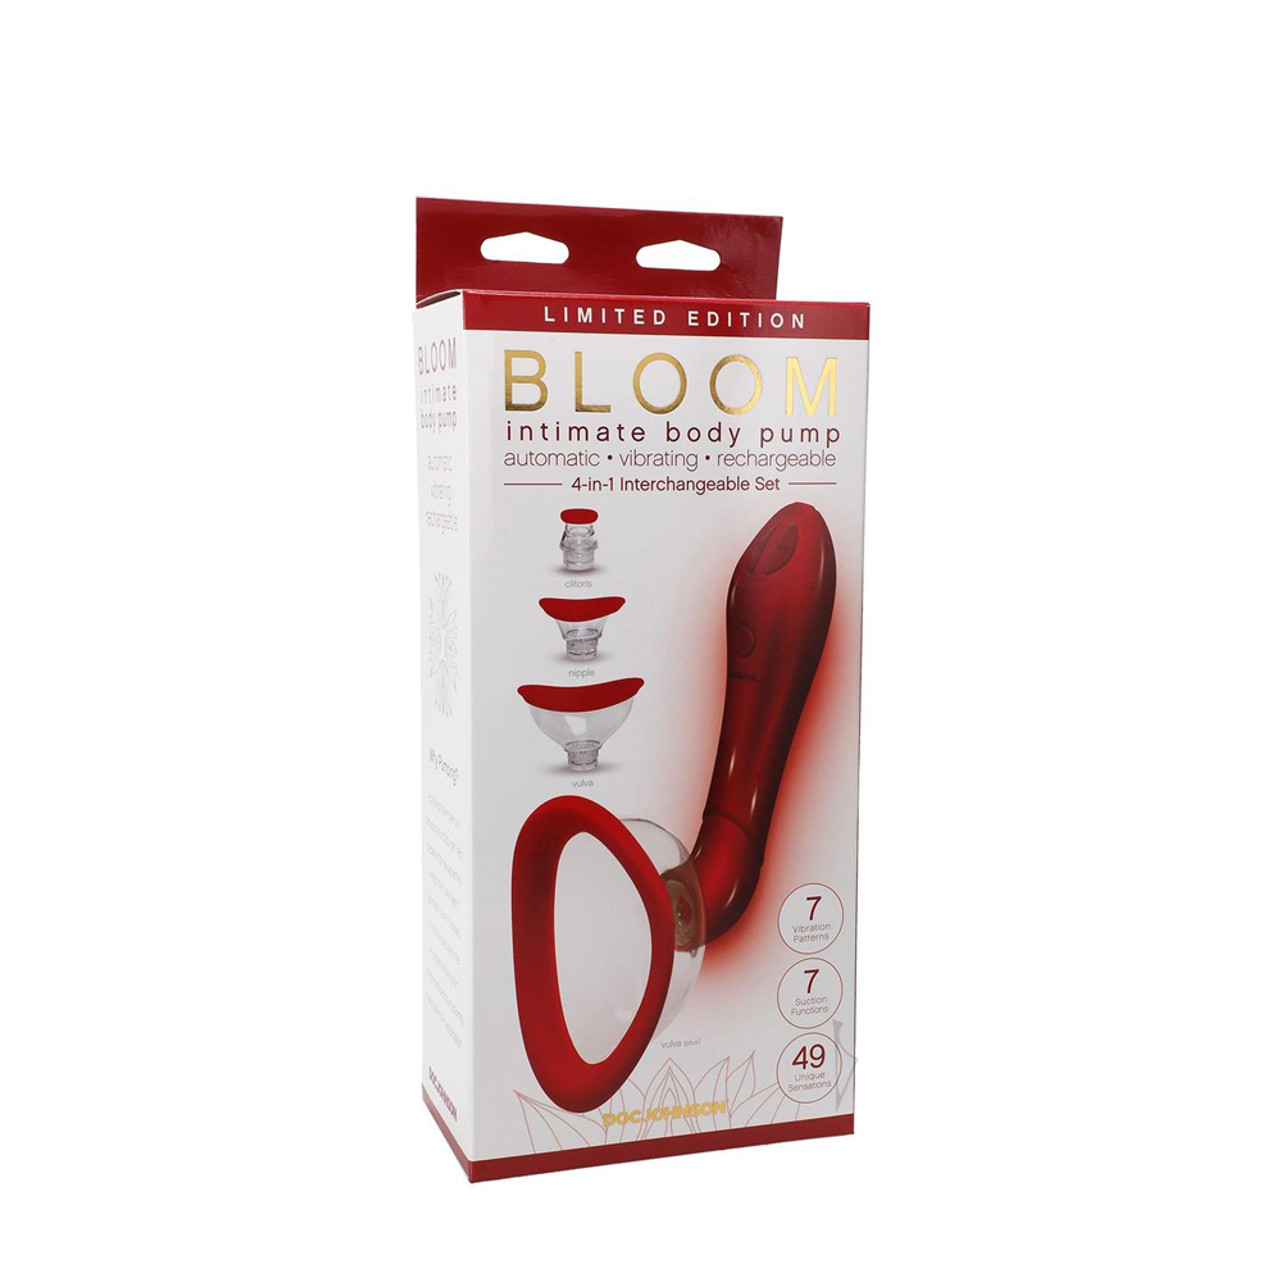 https://cdn11.bigcommerce.com/s-rph88/images/stencil/1280x1280/products/26384/262719/doc-johnson-bloom-limited-edition-14-function-rechargeable-automatic-vibrating-intimate-body-pump-4-piece-kit-red-1__37757.1668115249.jpg?c=2